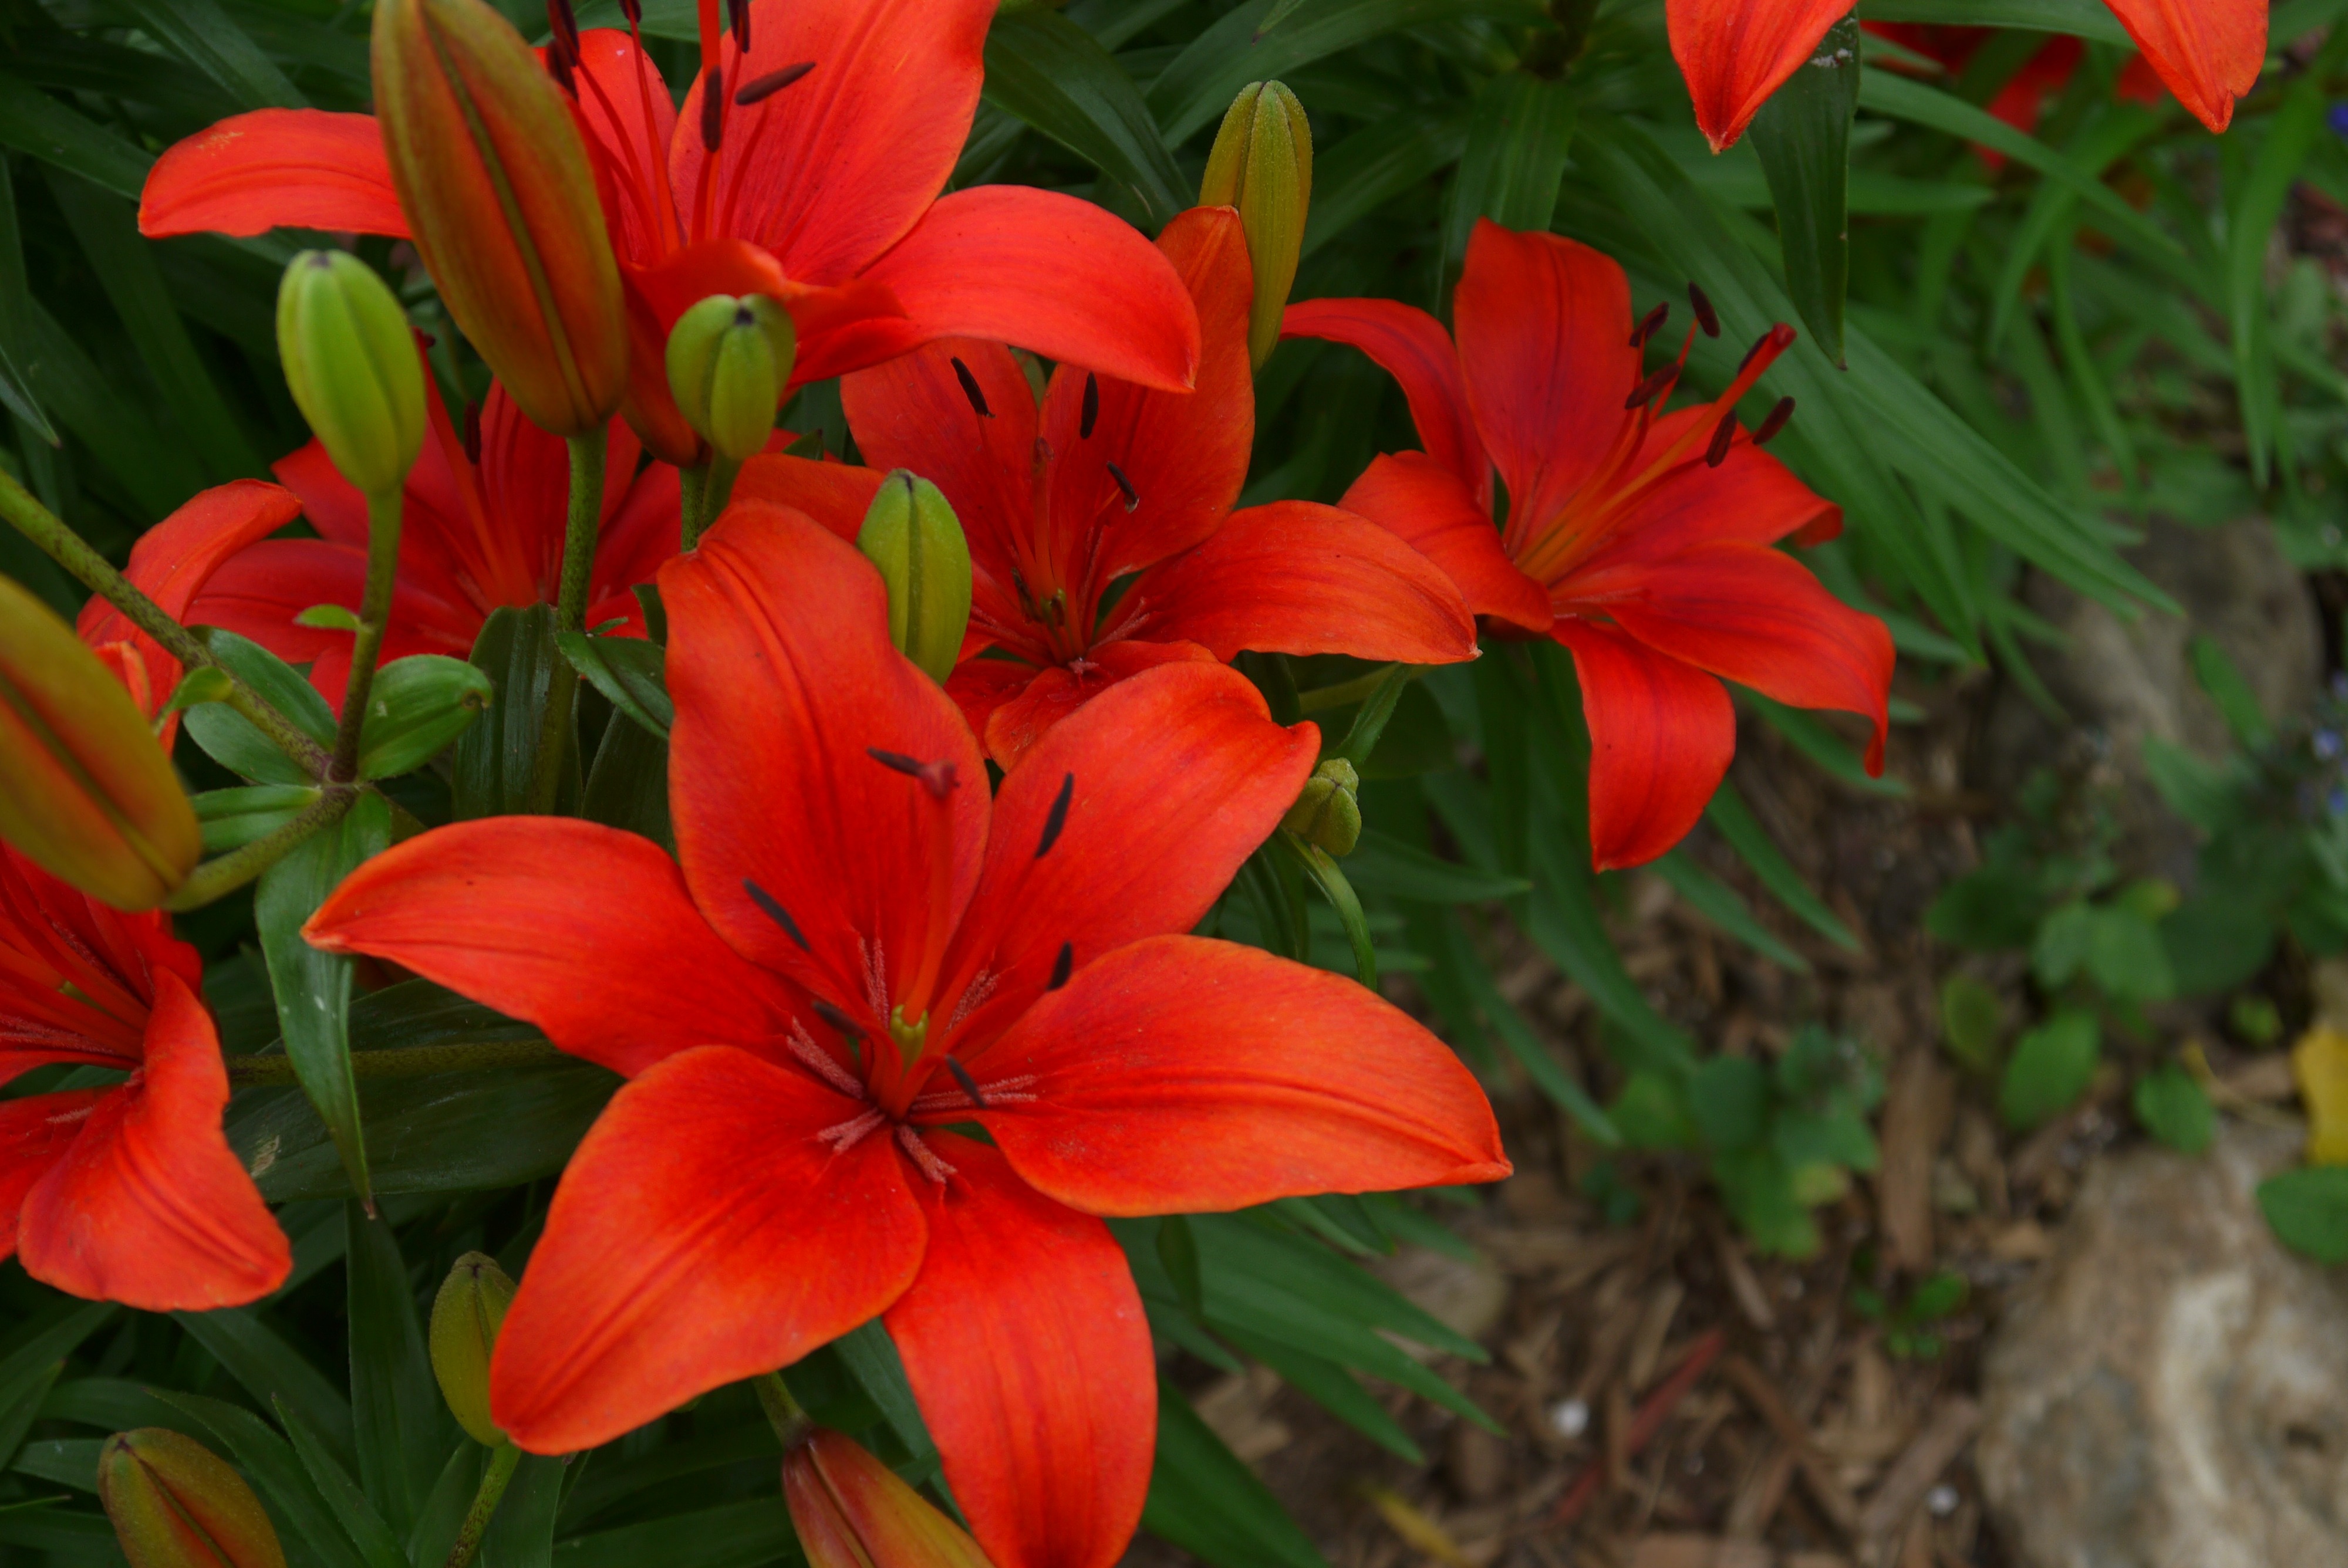 red lily flower wallpaper